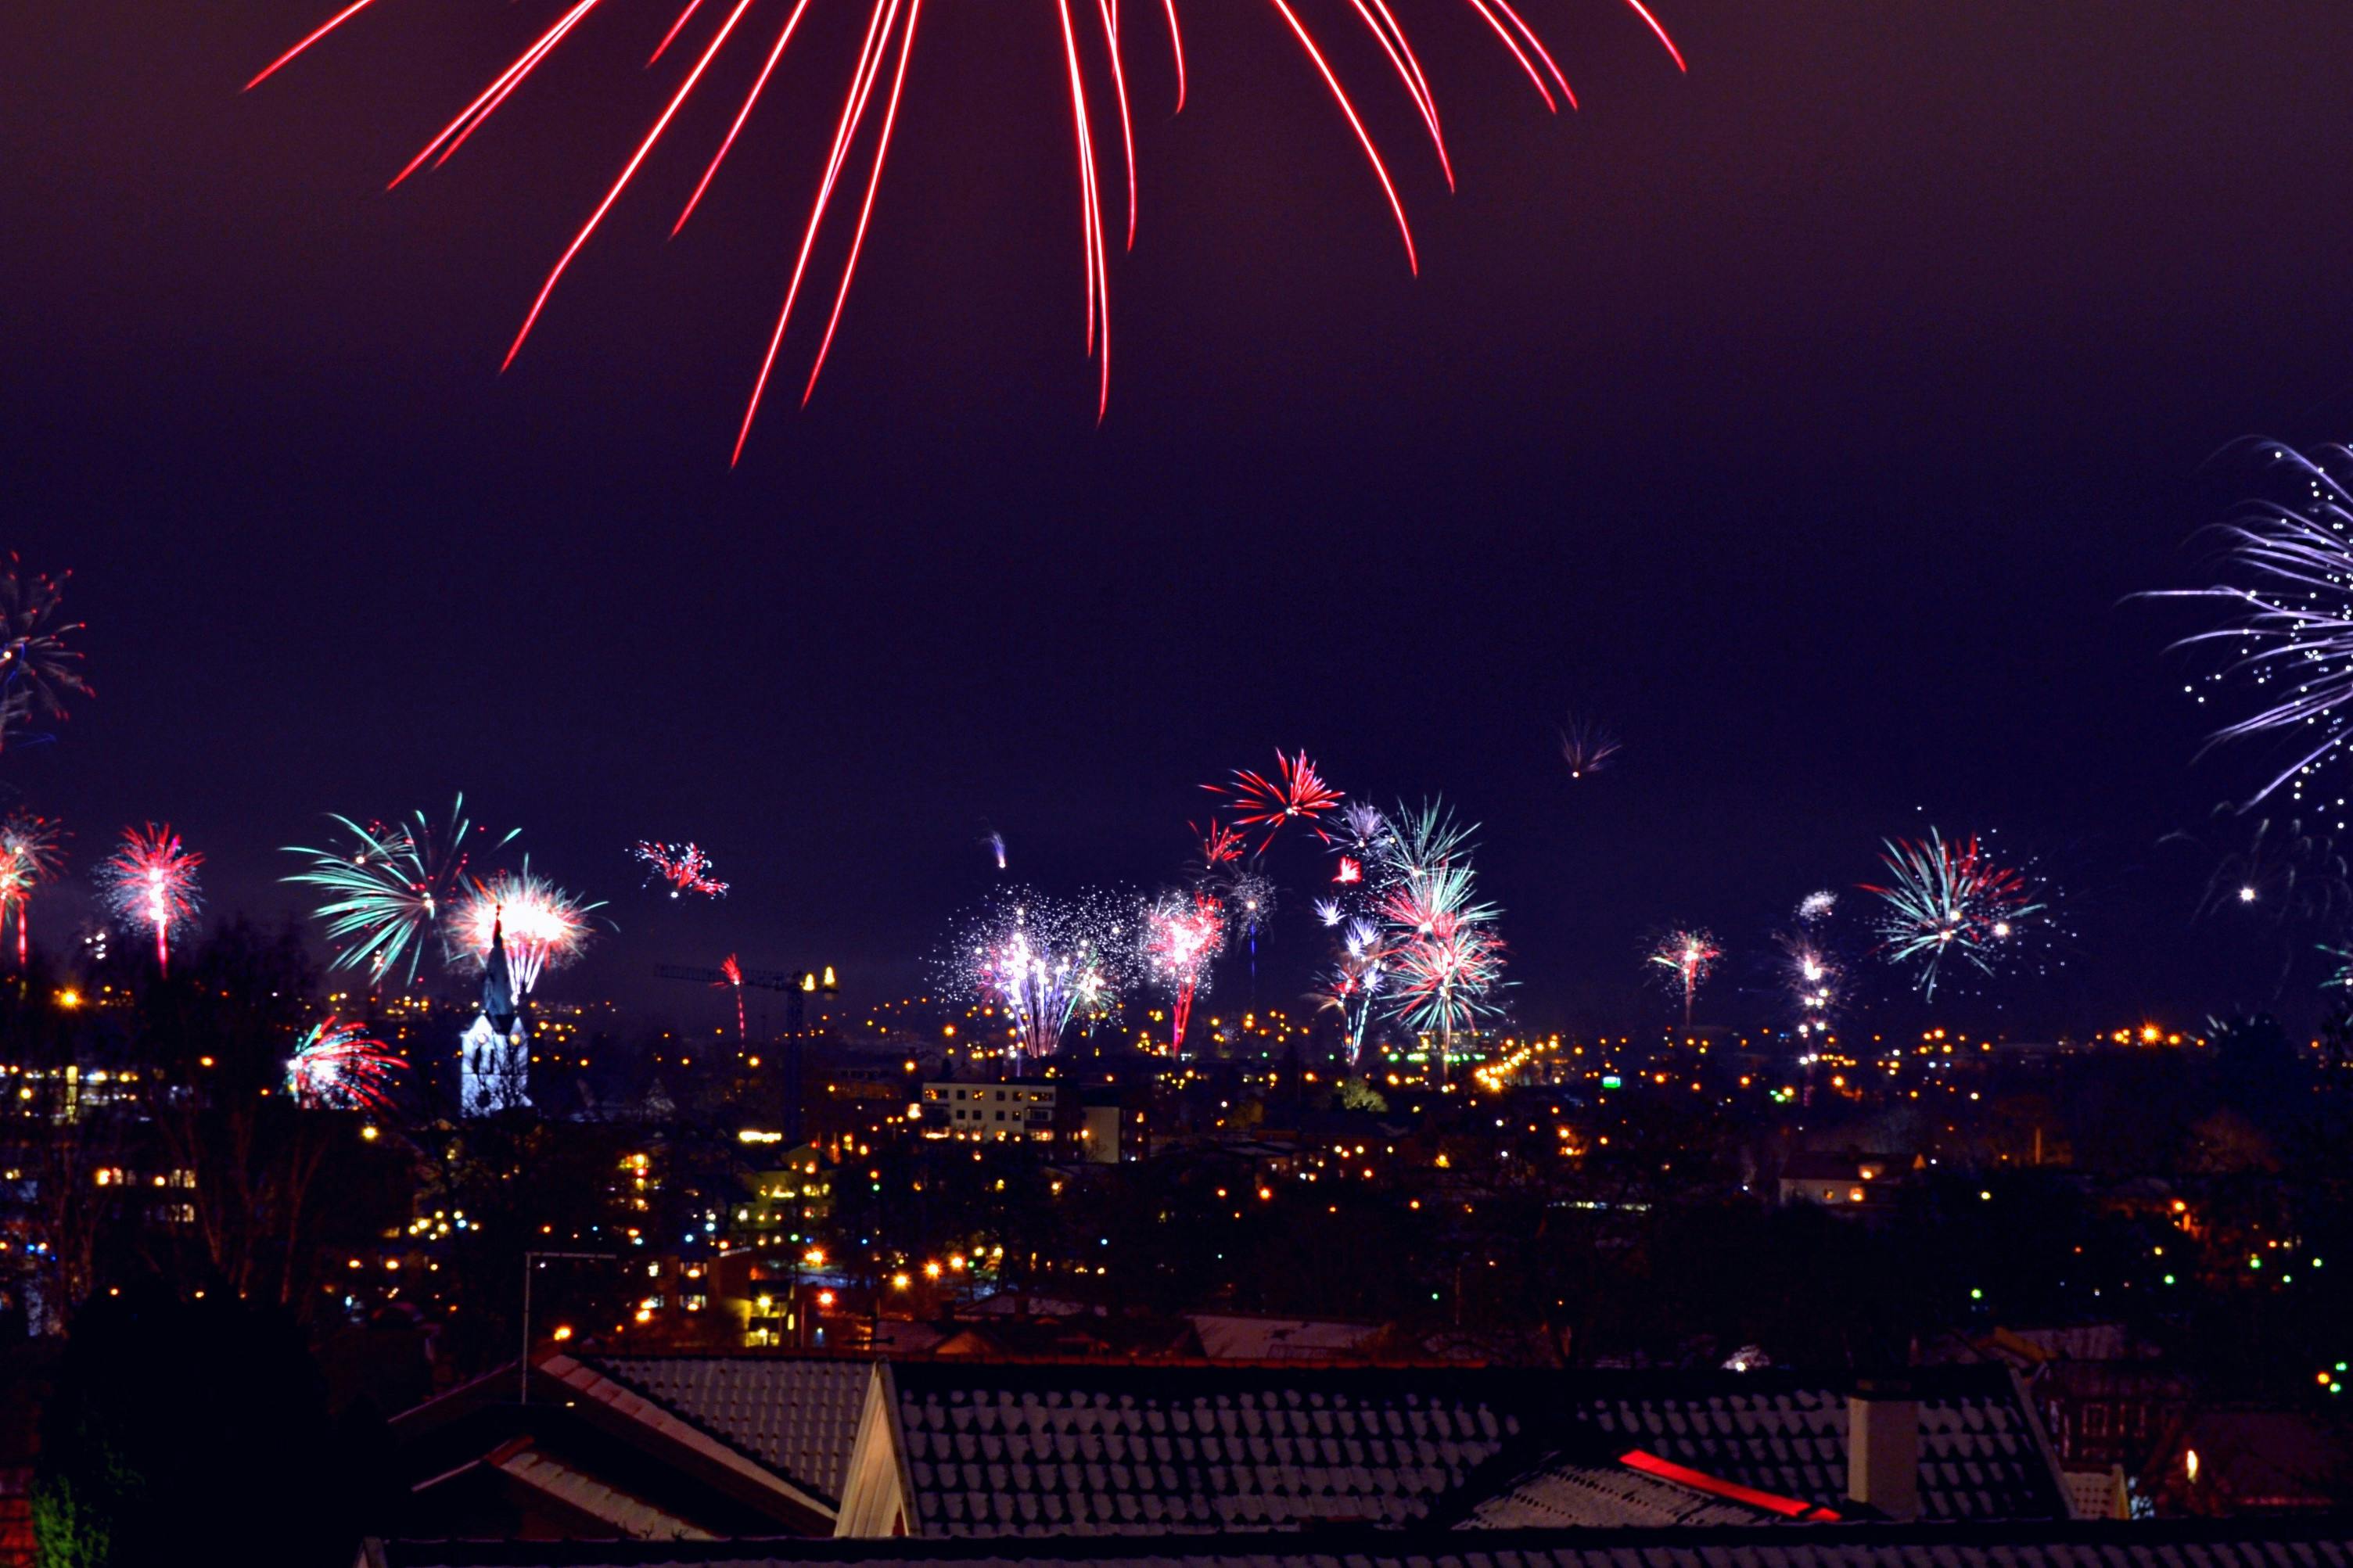 A stunning display of fireworks over a city